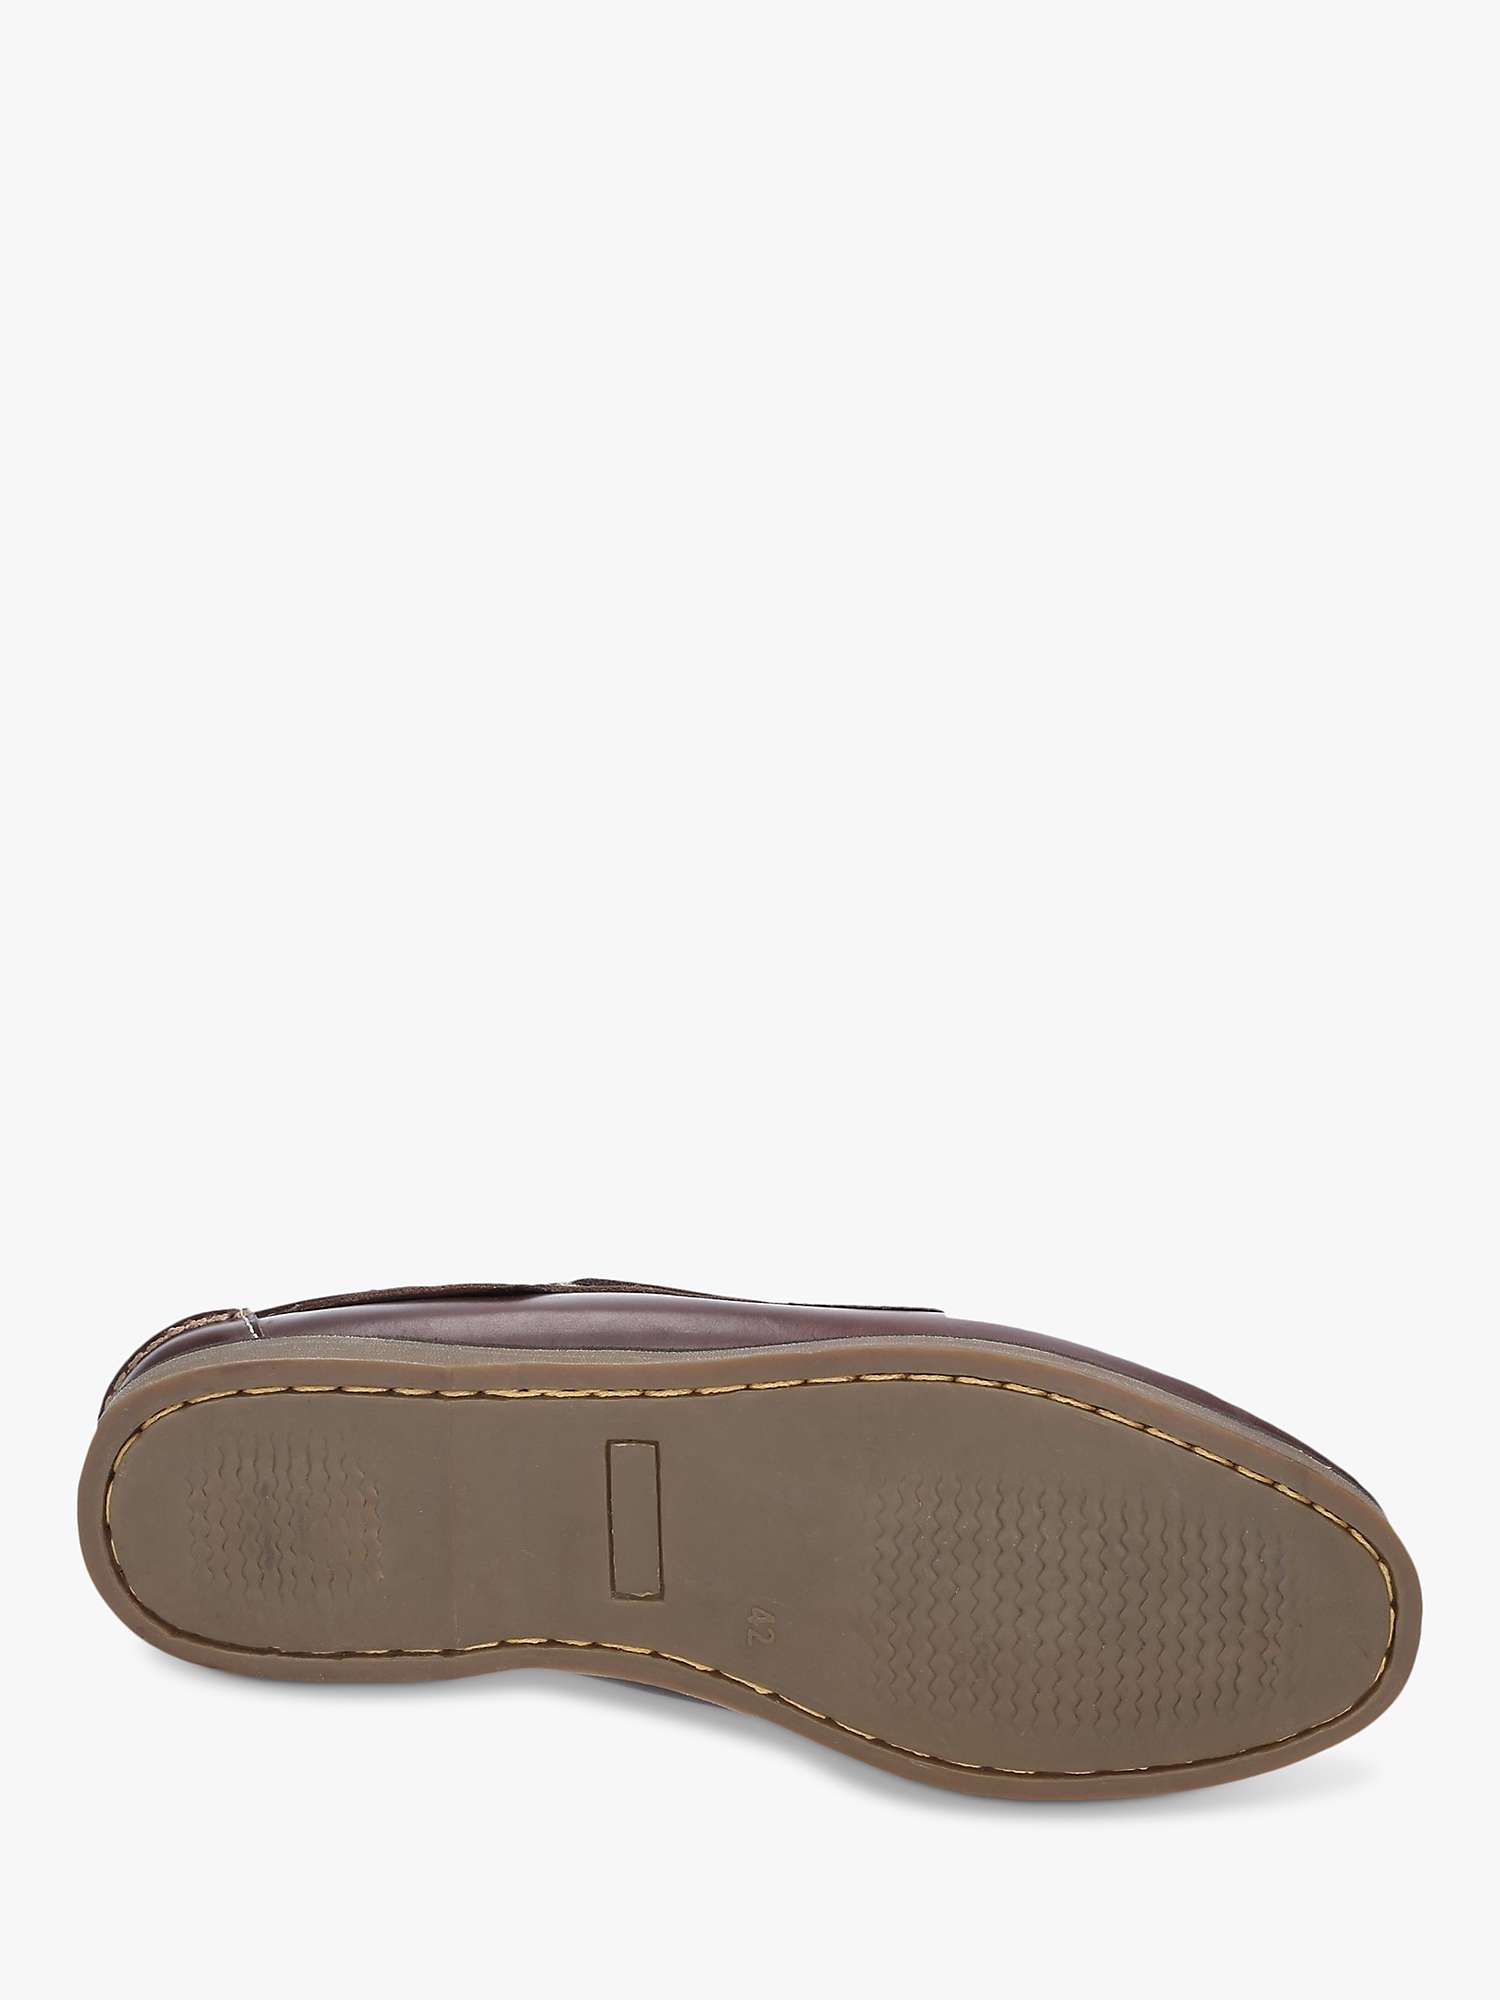 Buy Hush Puppies Henry Leather Boat Shoe Online at johnlewis.com